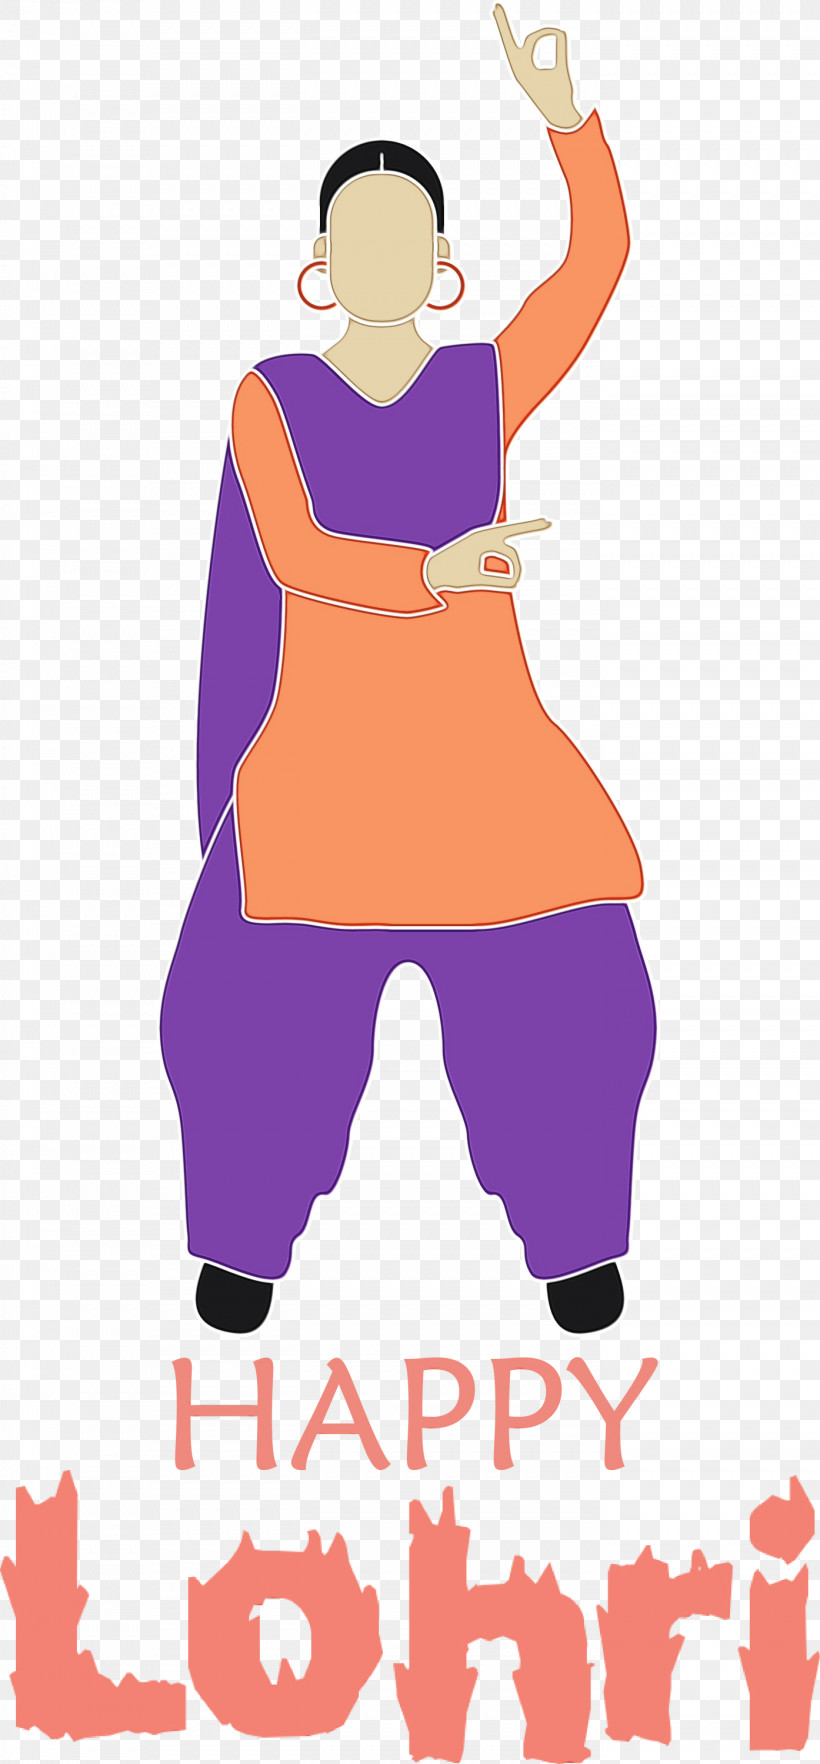 Clothing Cartoon Shoe Character Male, PNG, 1394x3000px, Happy Lohri, Cartoon, Character, Clothing, Happiness Download Free